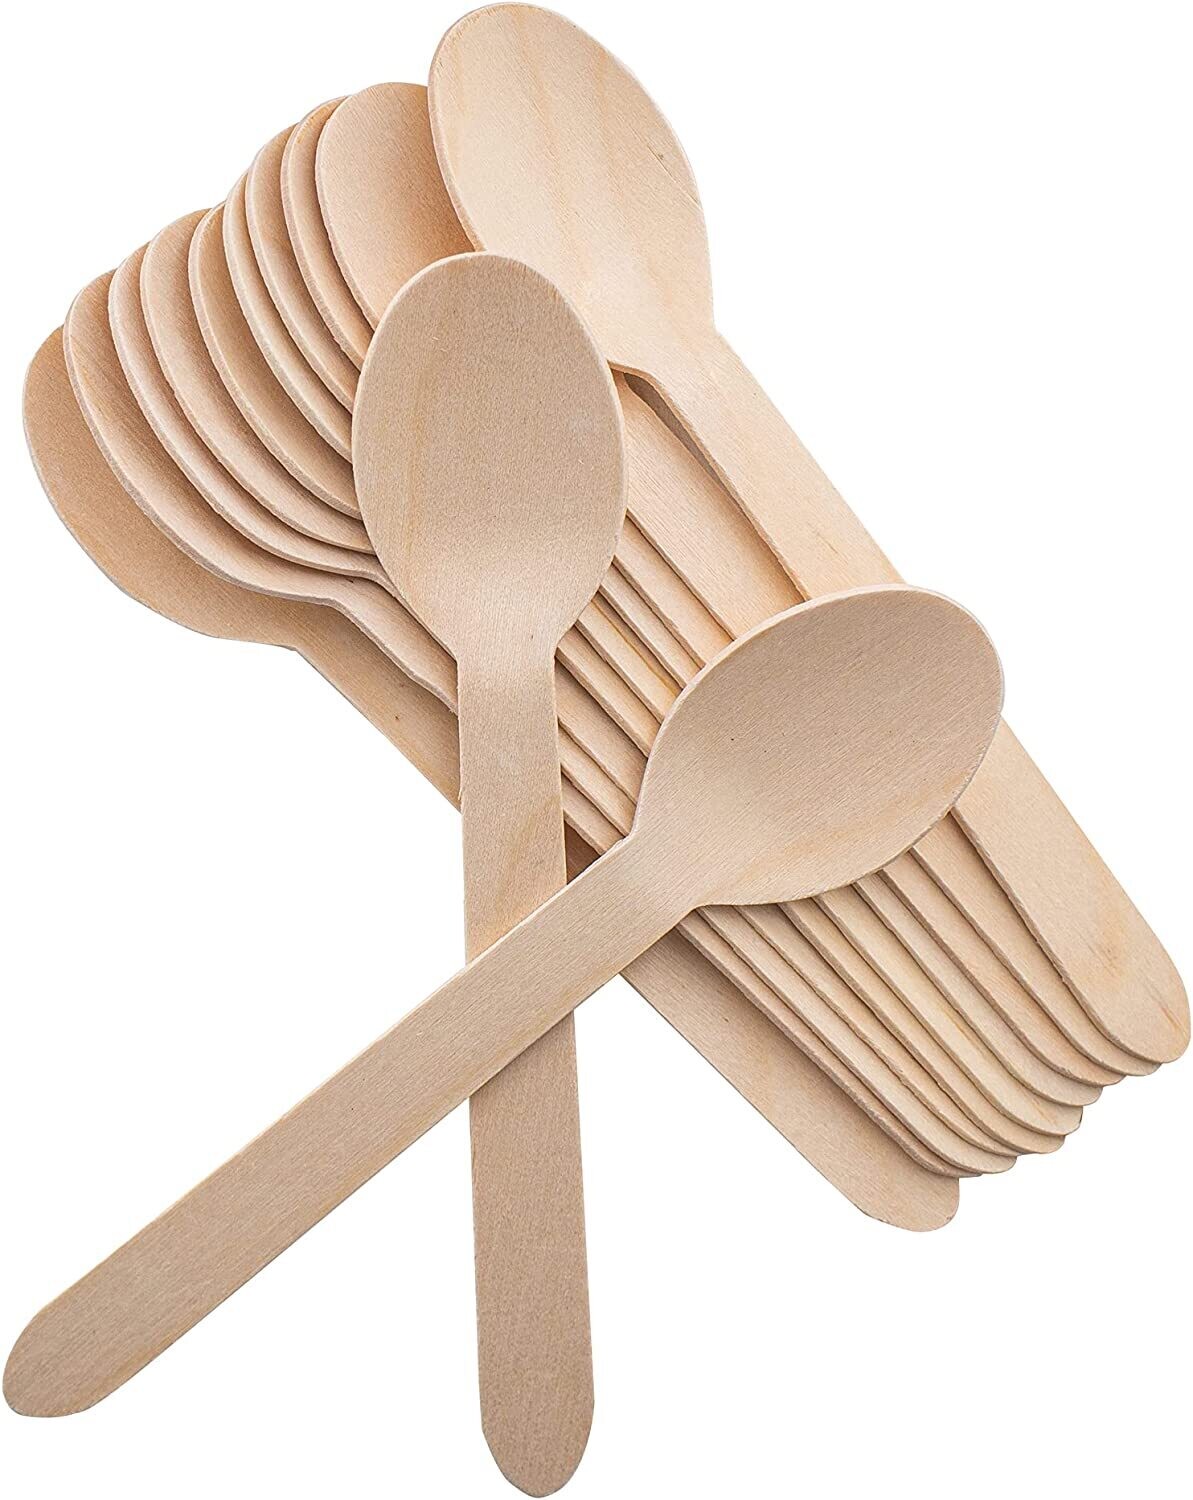 Disposable Wooden spoons 25pcs ,Great for Parties, Camping,Weddings&Dinner Events (Spoons)